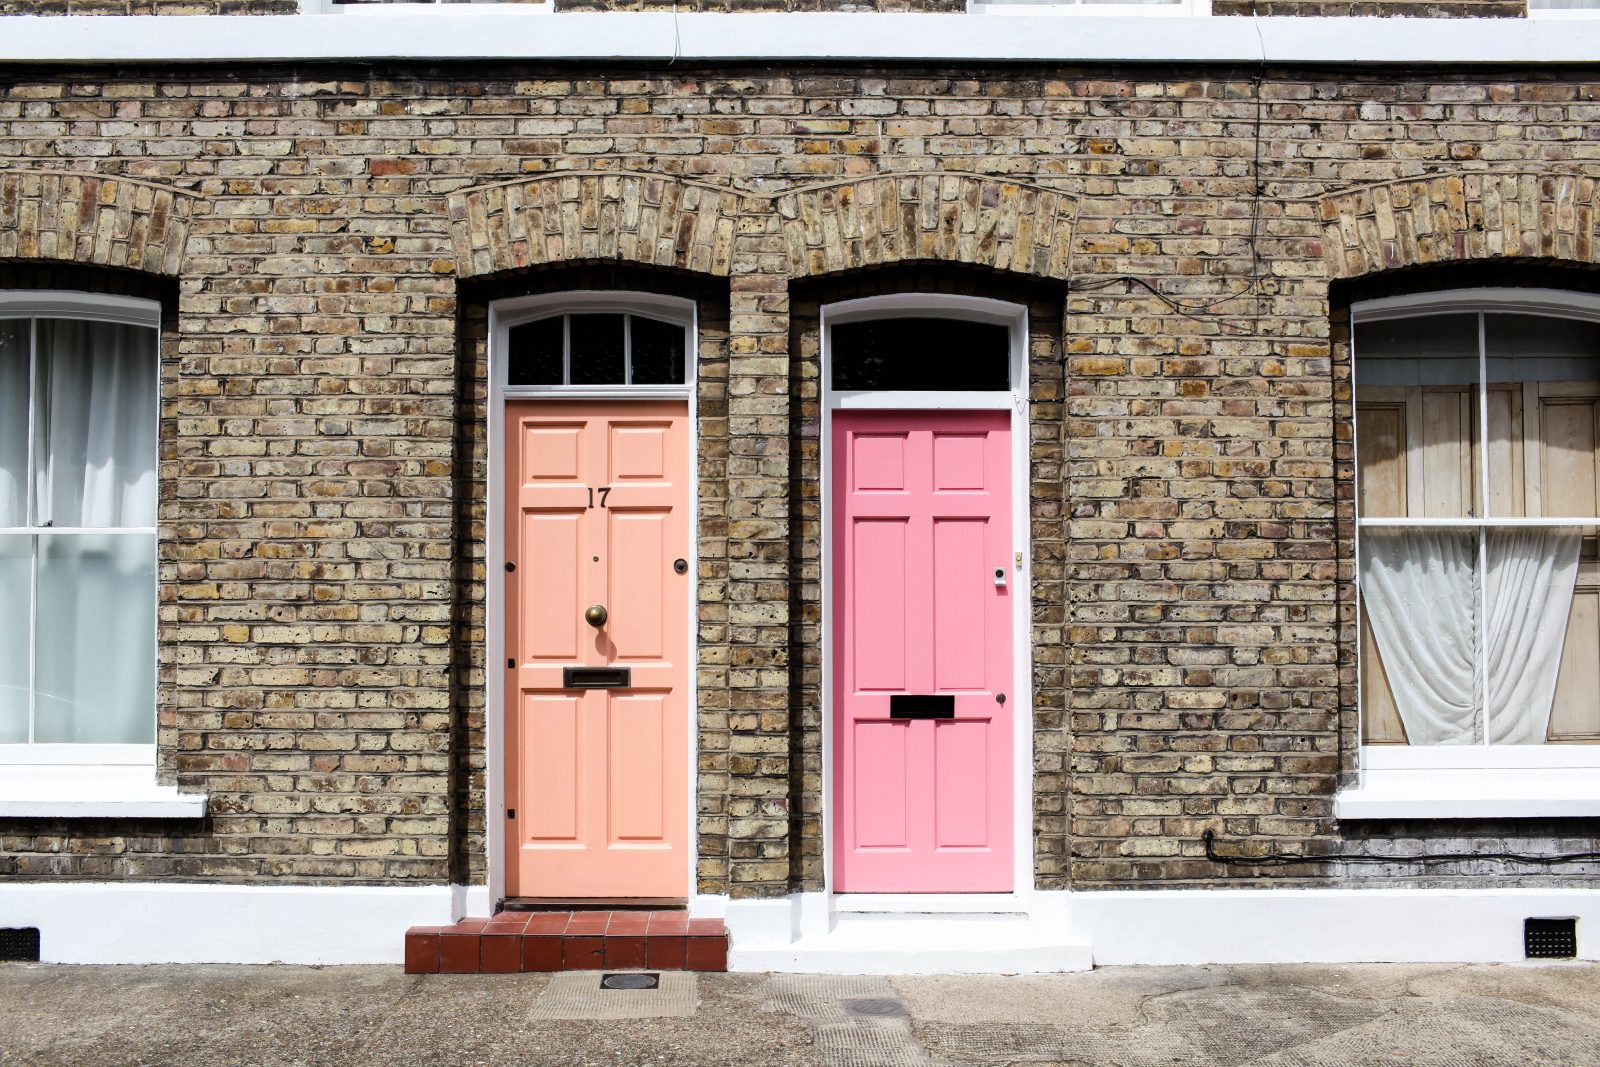 Two pink doors next to one another on a street.